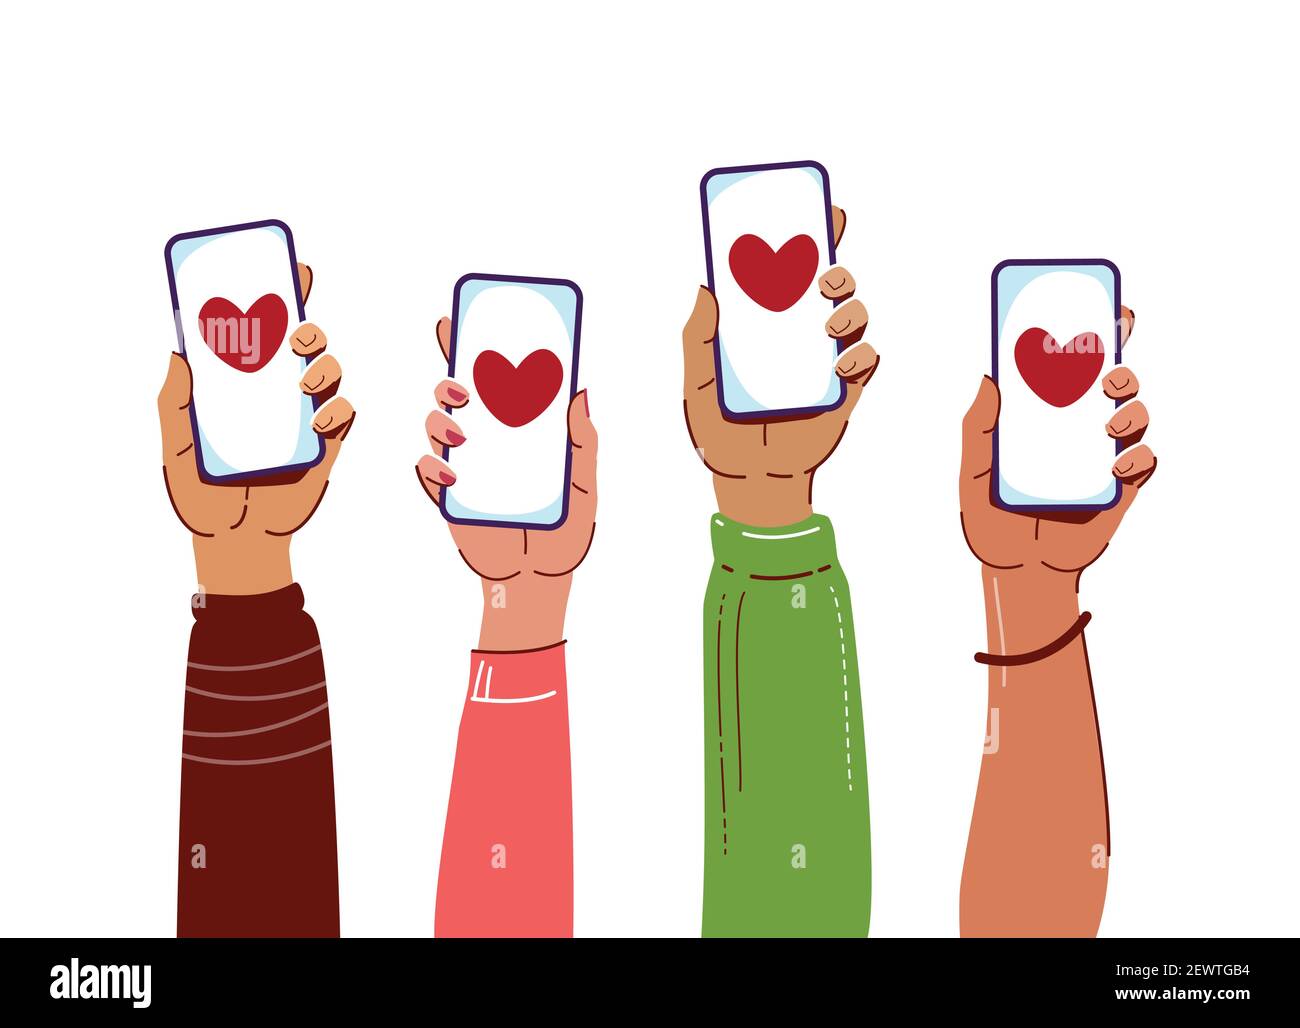 Hands holding smartphones. People Interacting on social media or network. Online communication flat vector illustration Stock Vector